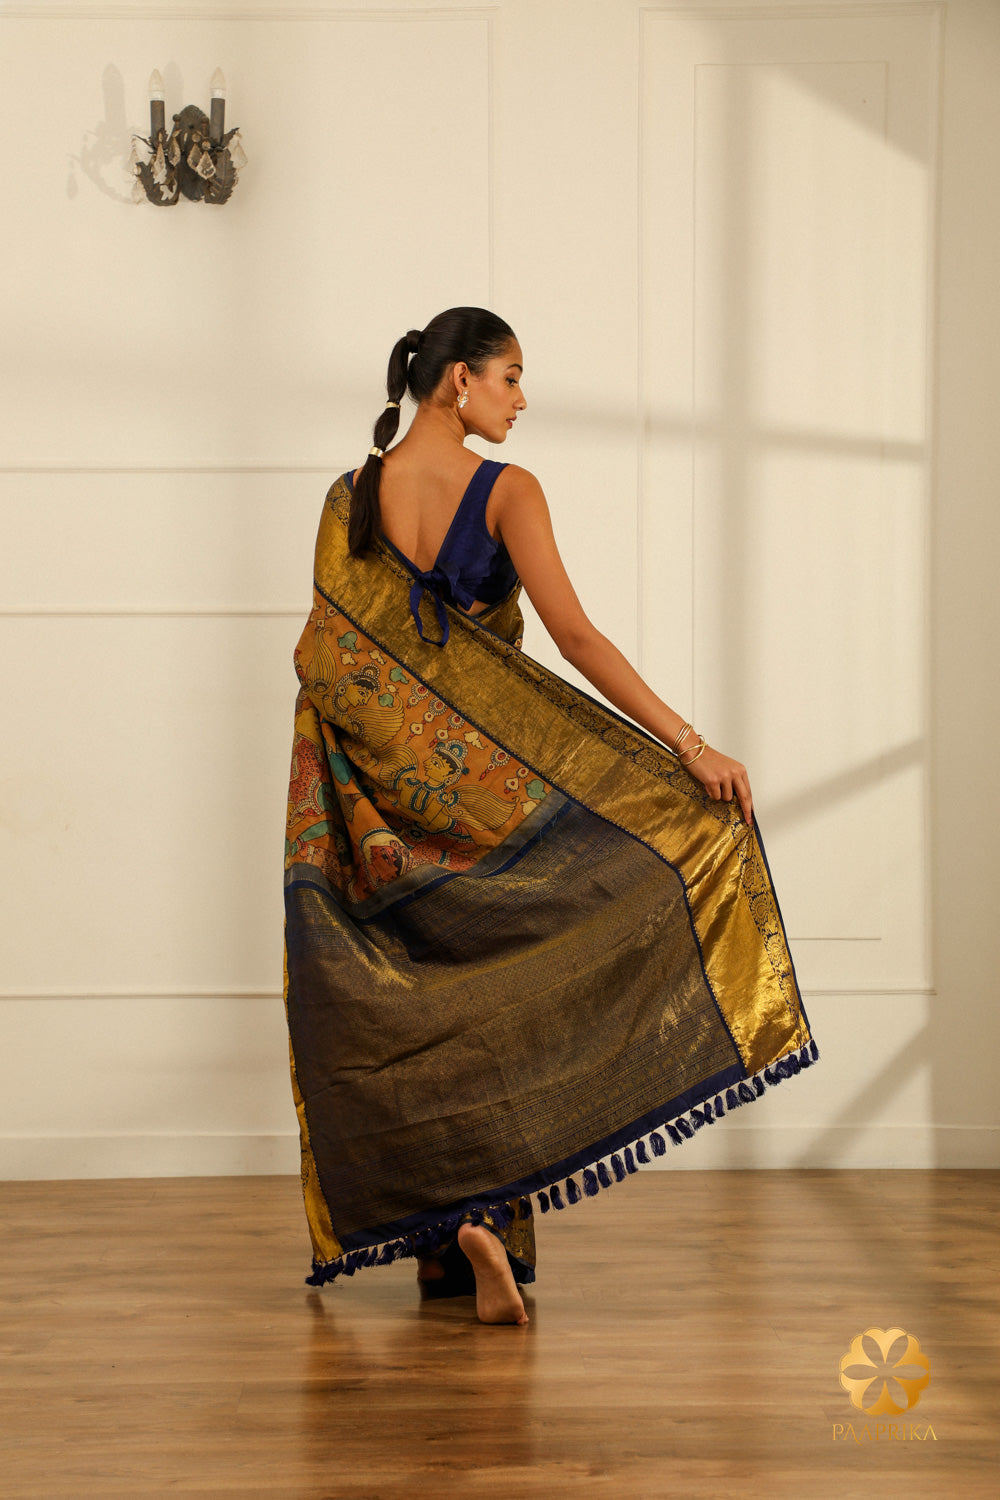 A full-length shot of a woman gracefully draped in the Kanjivaram saree, radiating cultural richness and spiritual significance.